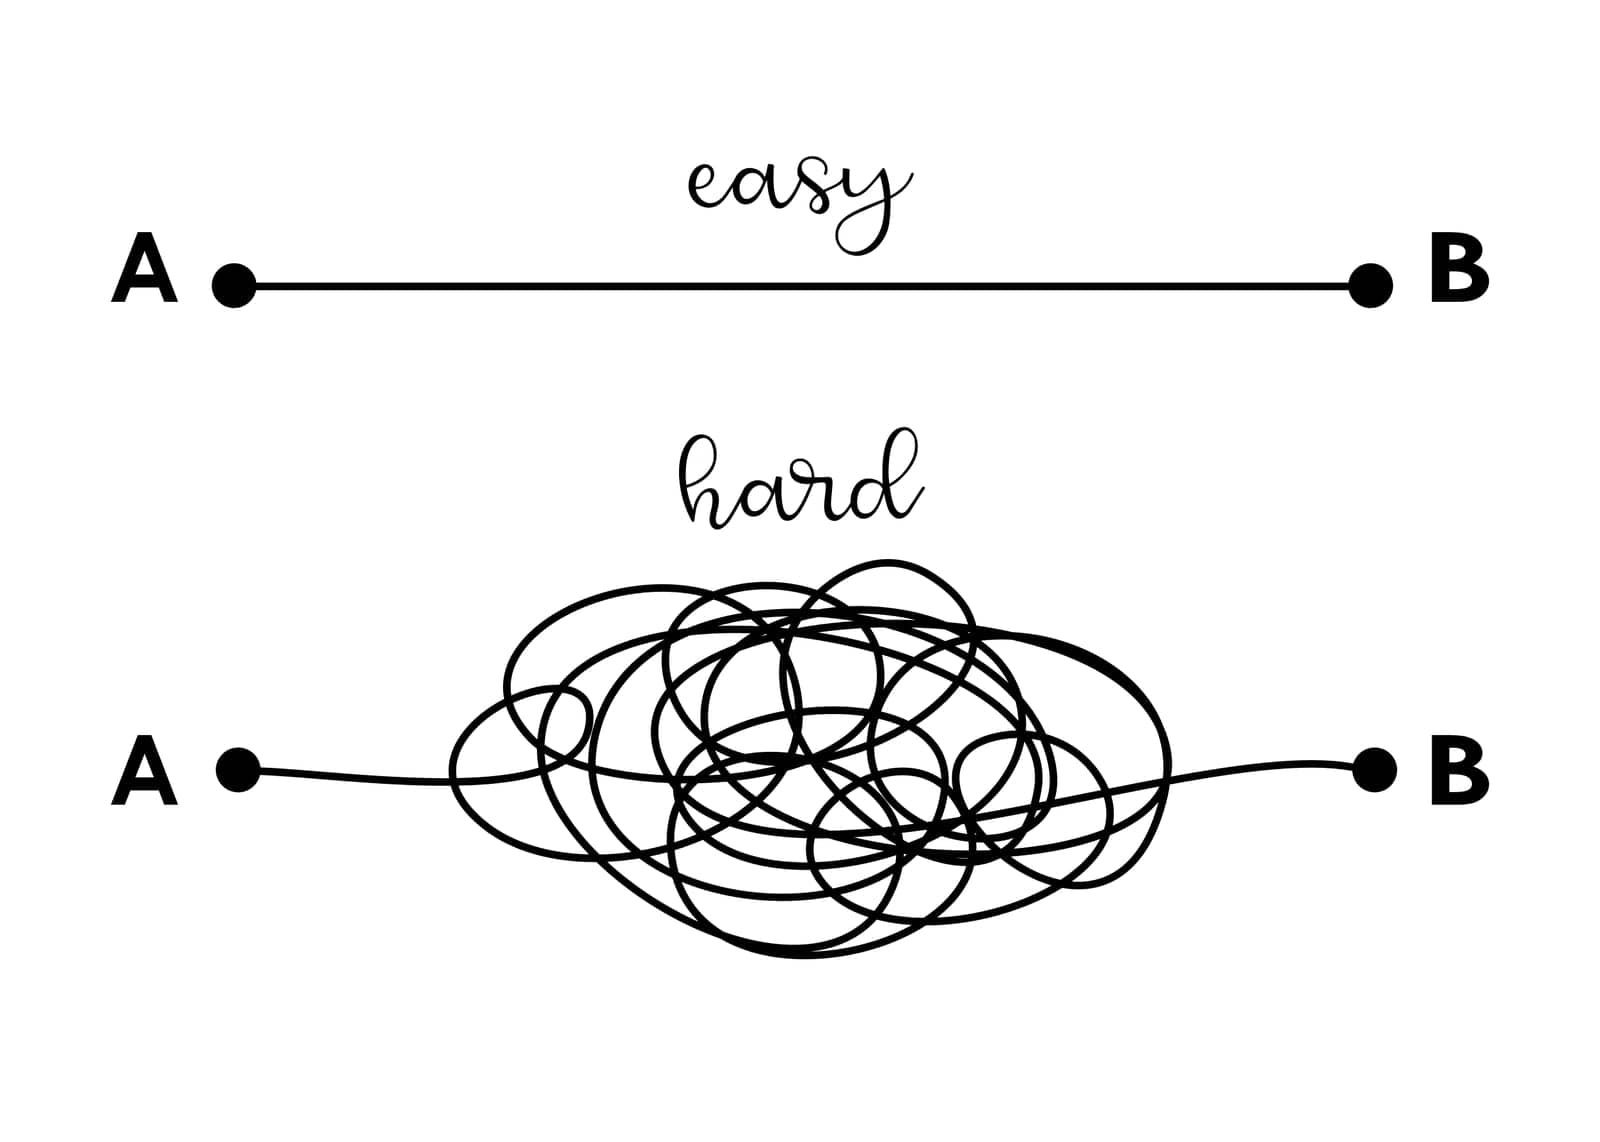 Hard and Easy way solution concept illustrated by tangled and straight lines. Complicated and simple path decision. by Anny_Sketches